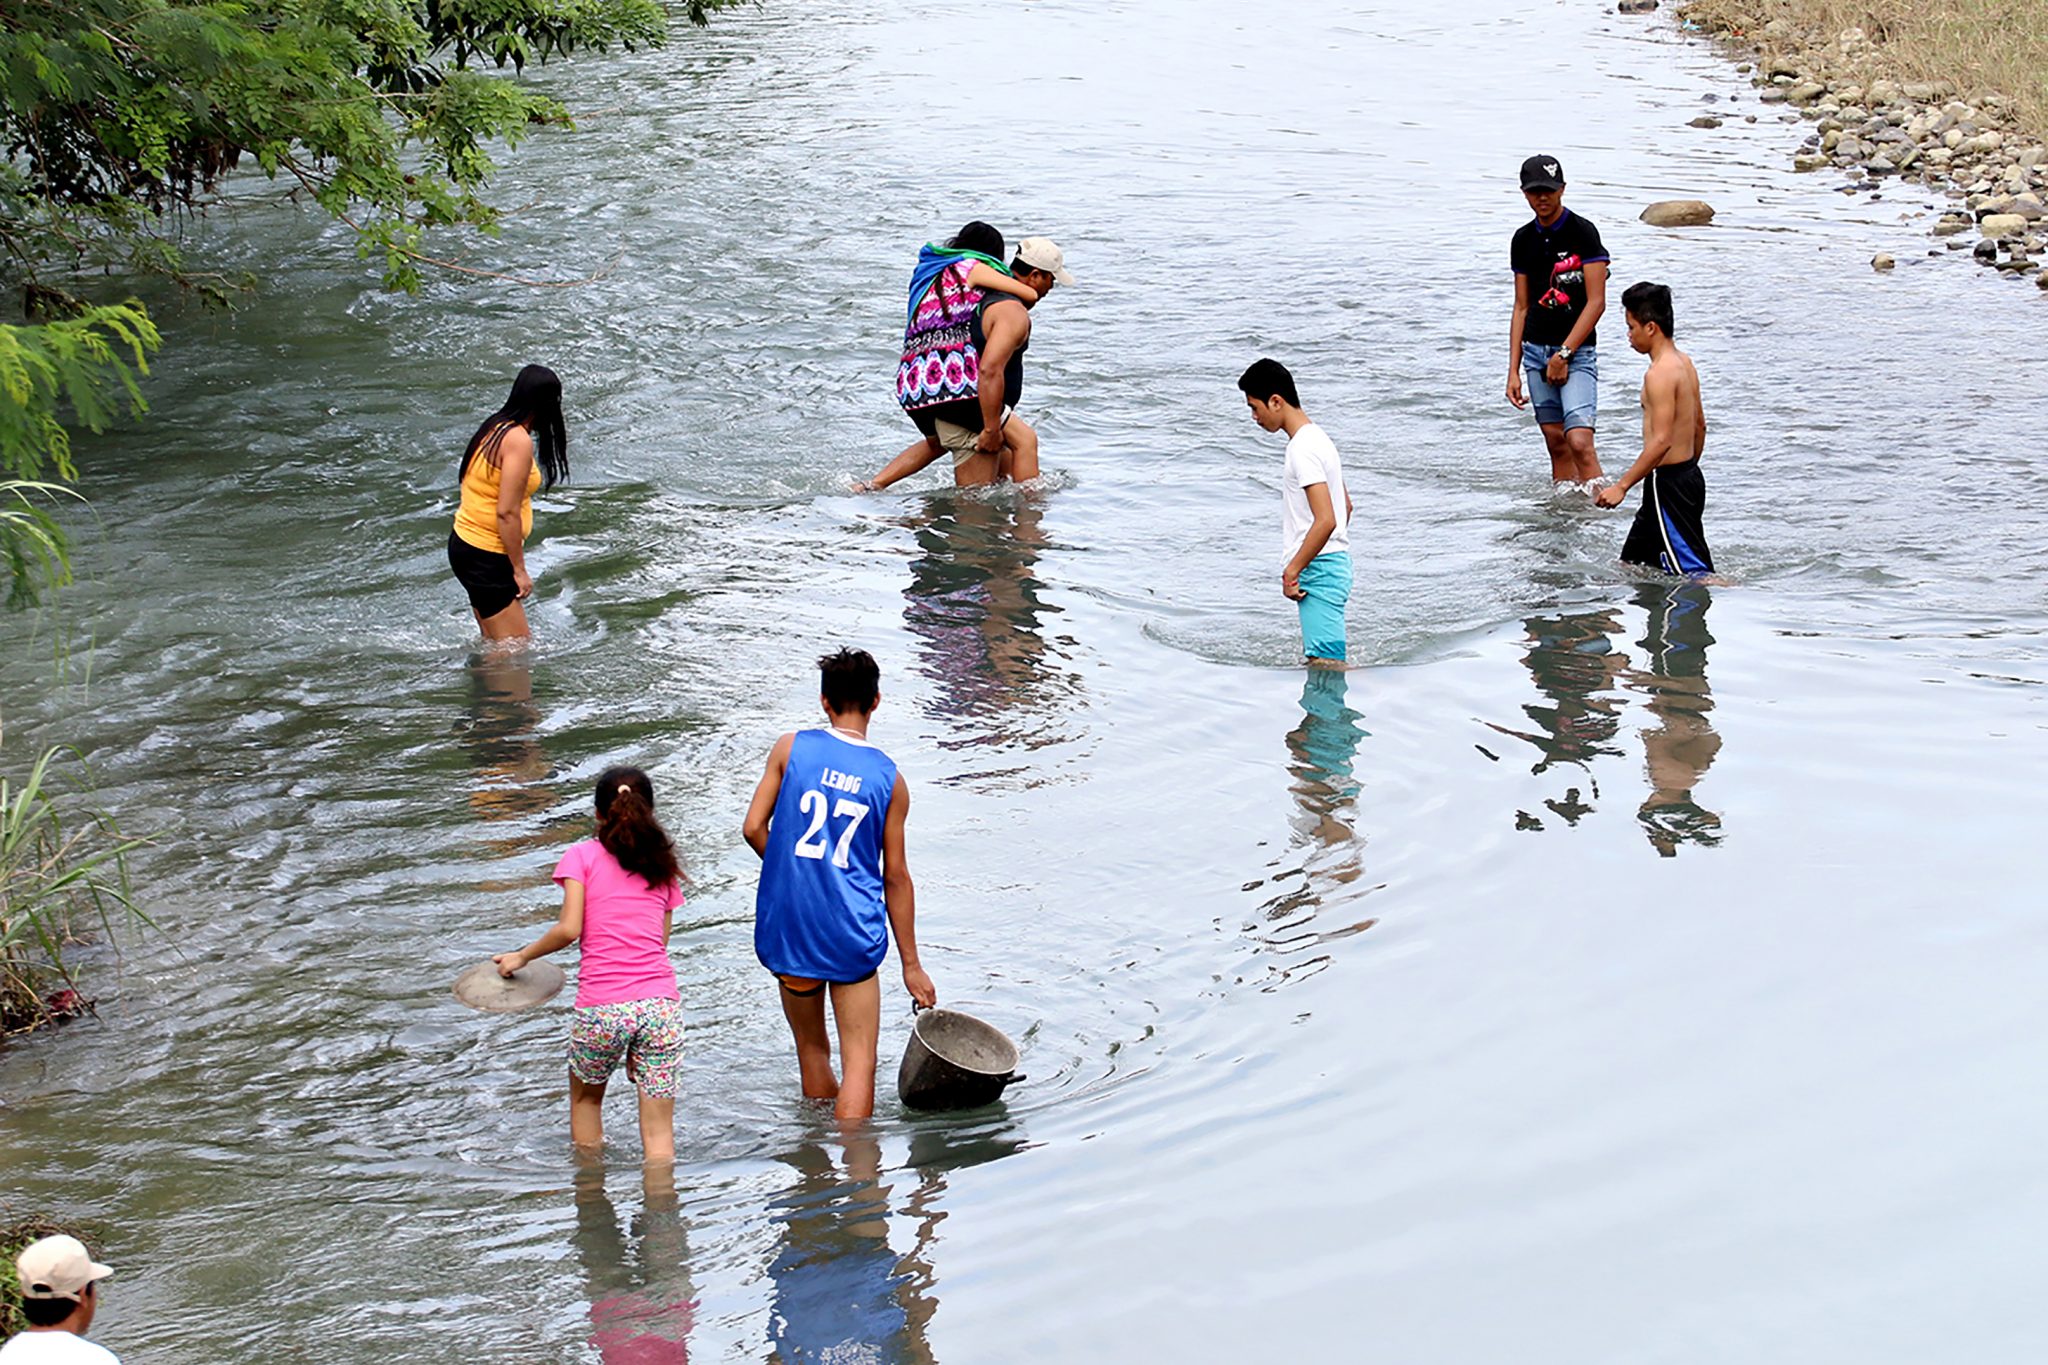 Residents cross a river after a bridge linking the city to nearby towns was destroyed, after a 6.5-magnitude earthquake struck overnight, in Surigao City in the southern island of Mindanao on February 11, 2017. Rescuers dug through rubble on February 11 to find survivors after a powerful earthquake struck the southern Philippines, killing at least four people and sending thousands fleeing for safety. / AFP PHOTO / ERWIN MASCARINAS